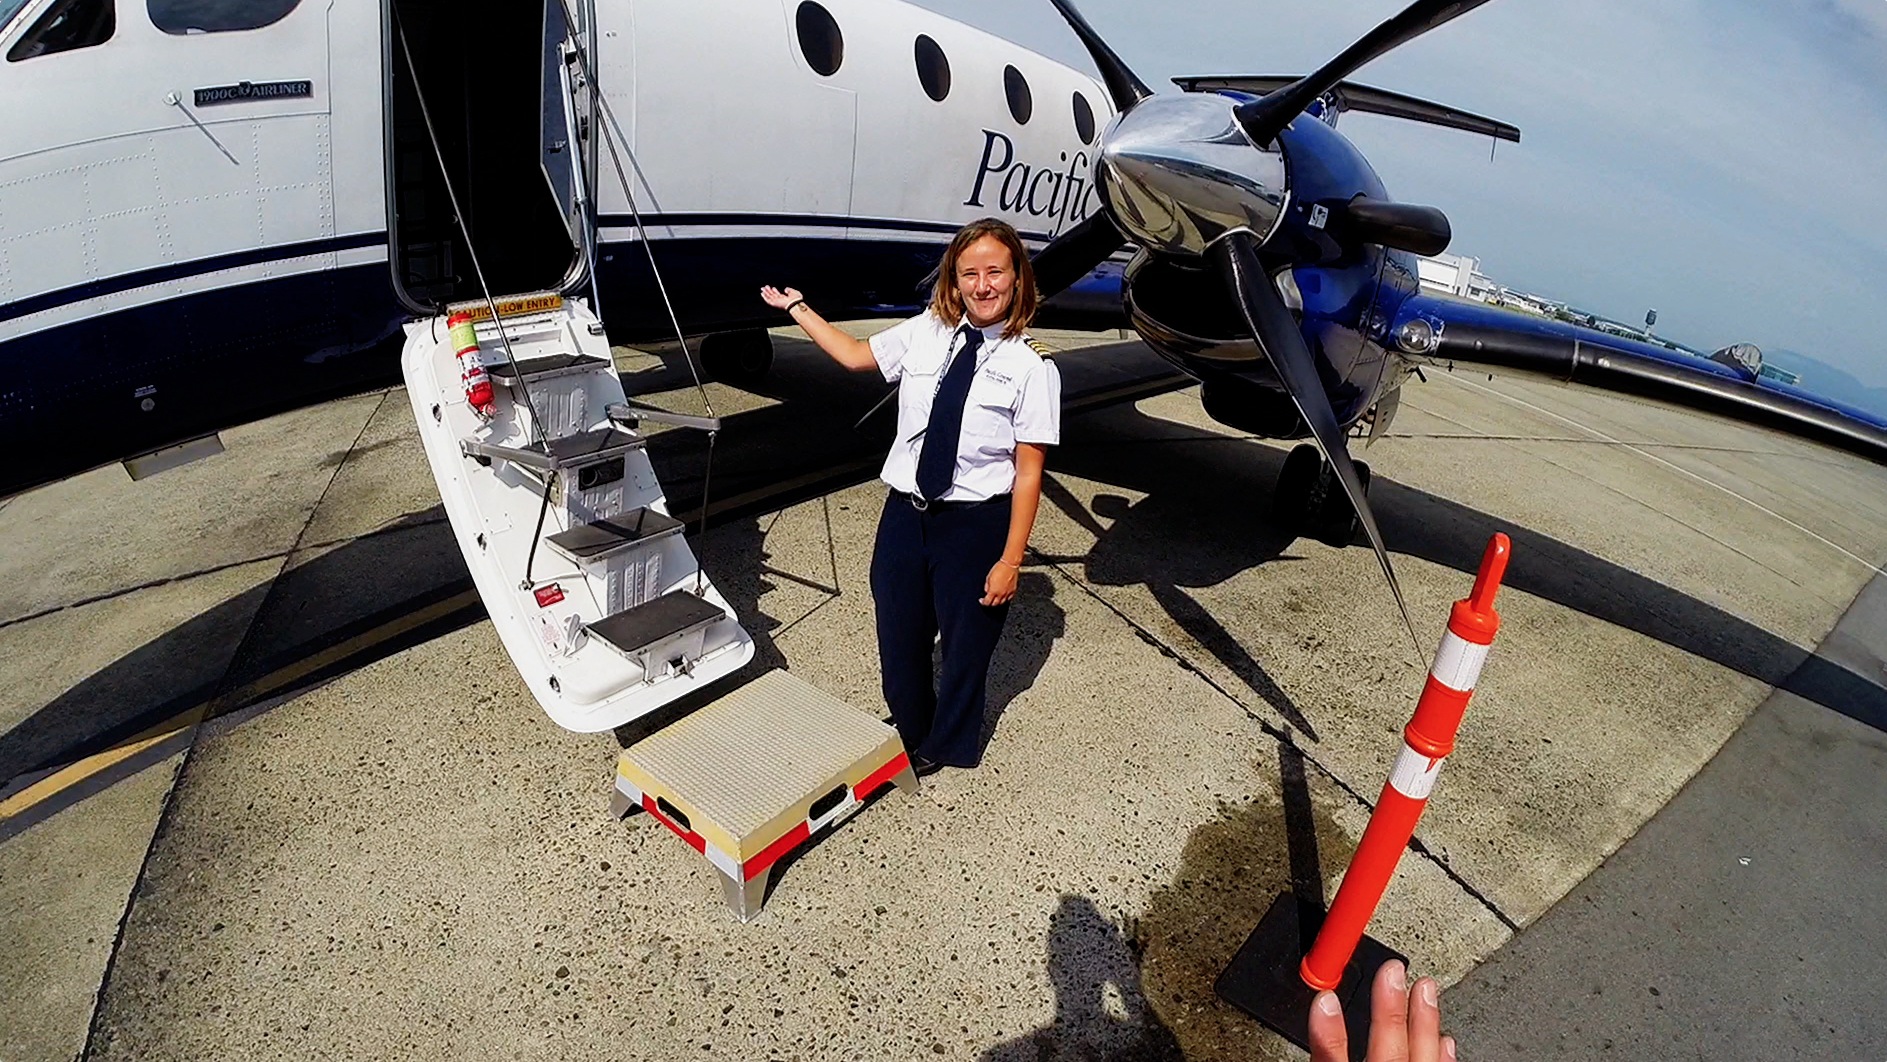 Pacific Coastal Airlines – Indulge Your Passion!